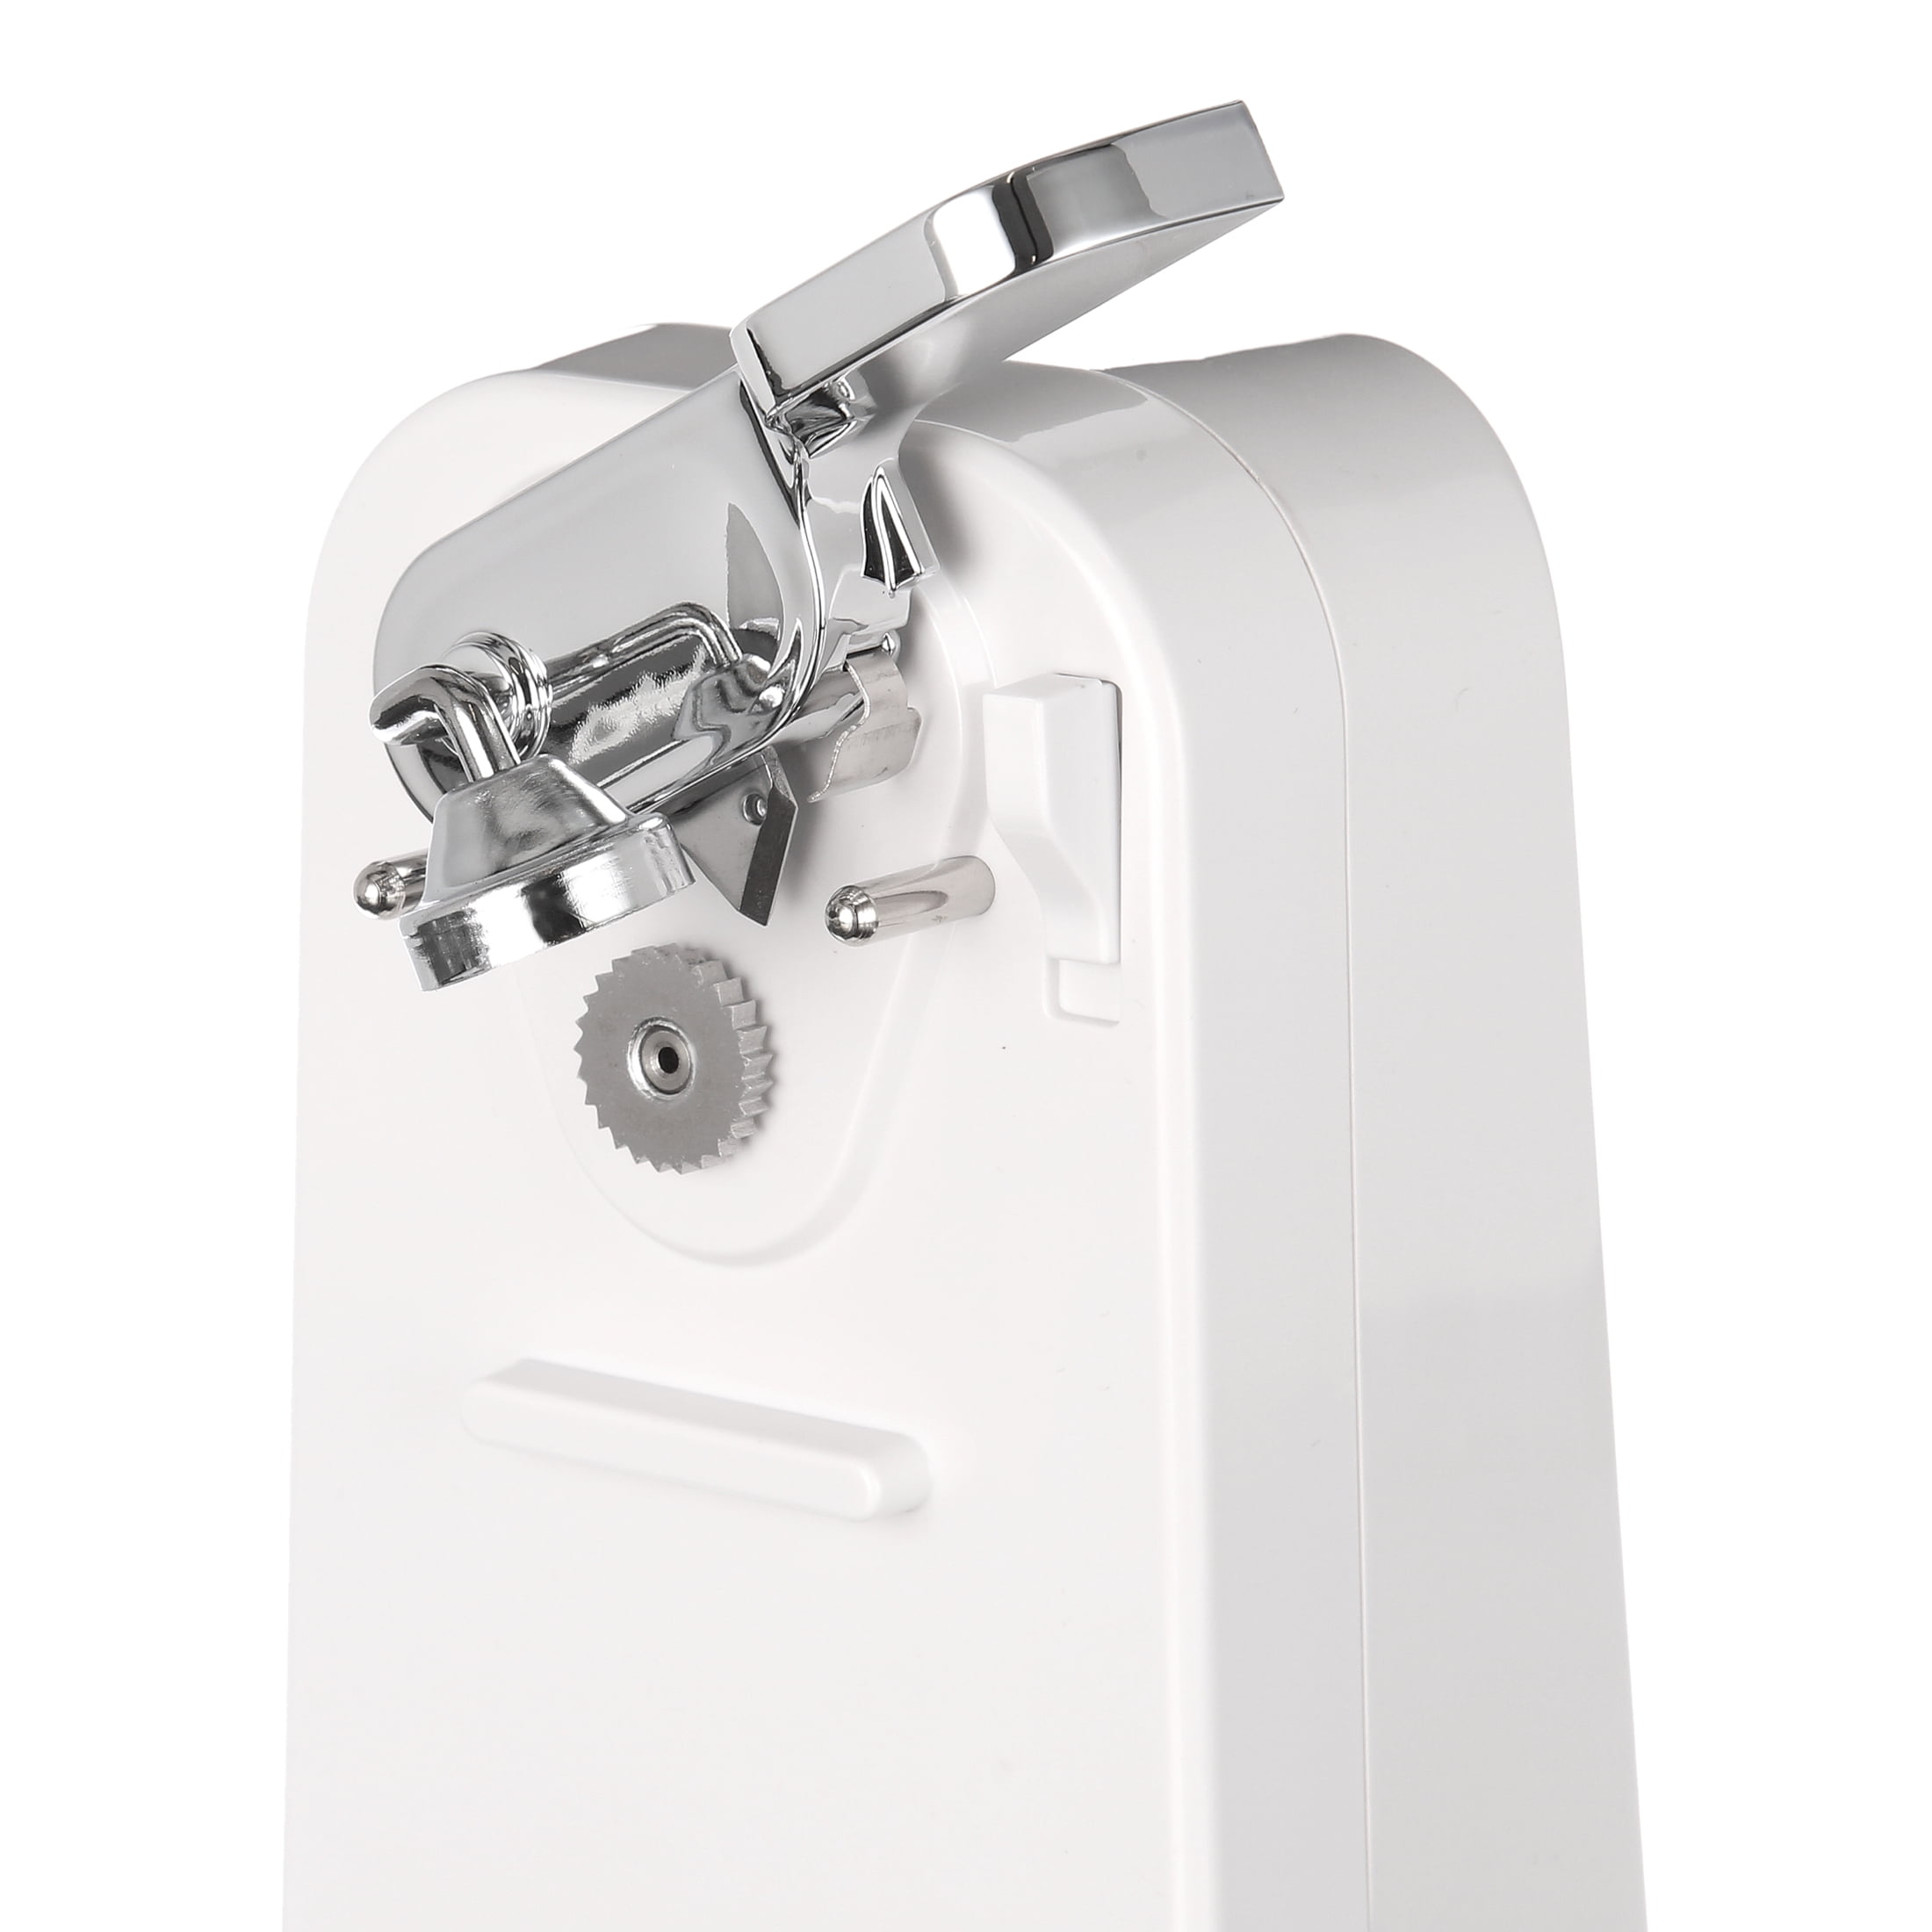 Cuisinart Deluxe Can Opener in White - CCO-50